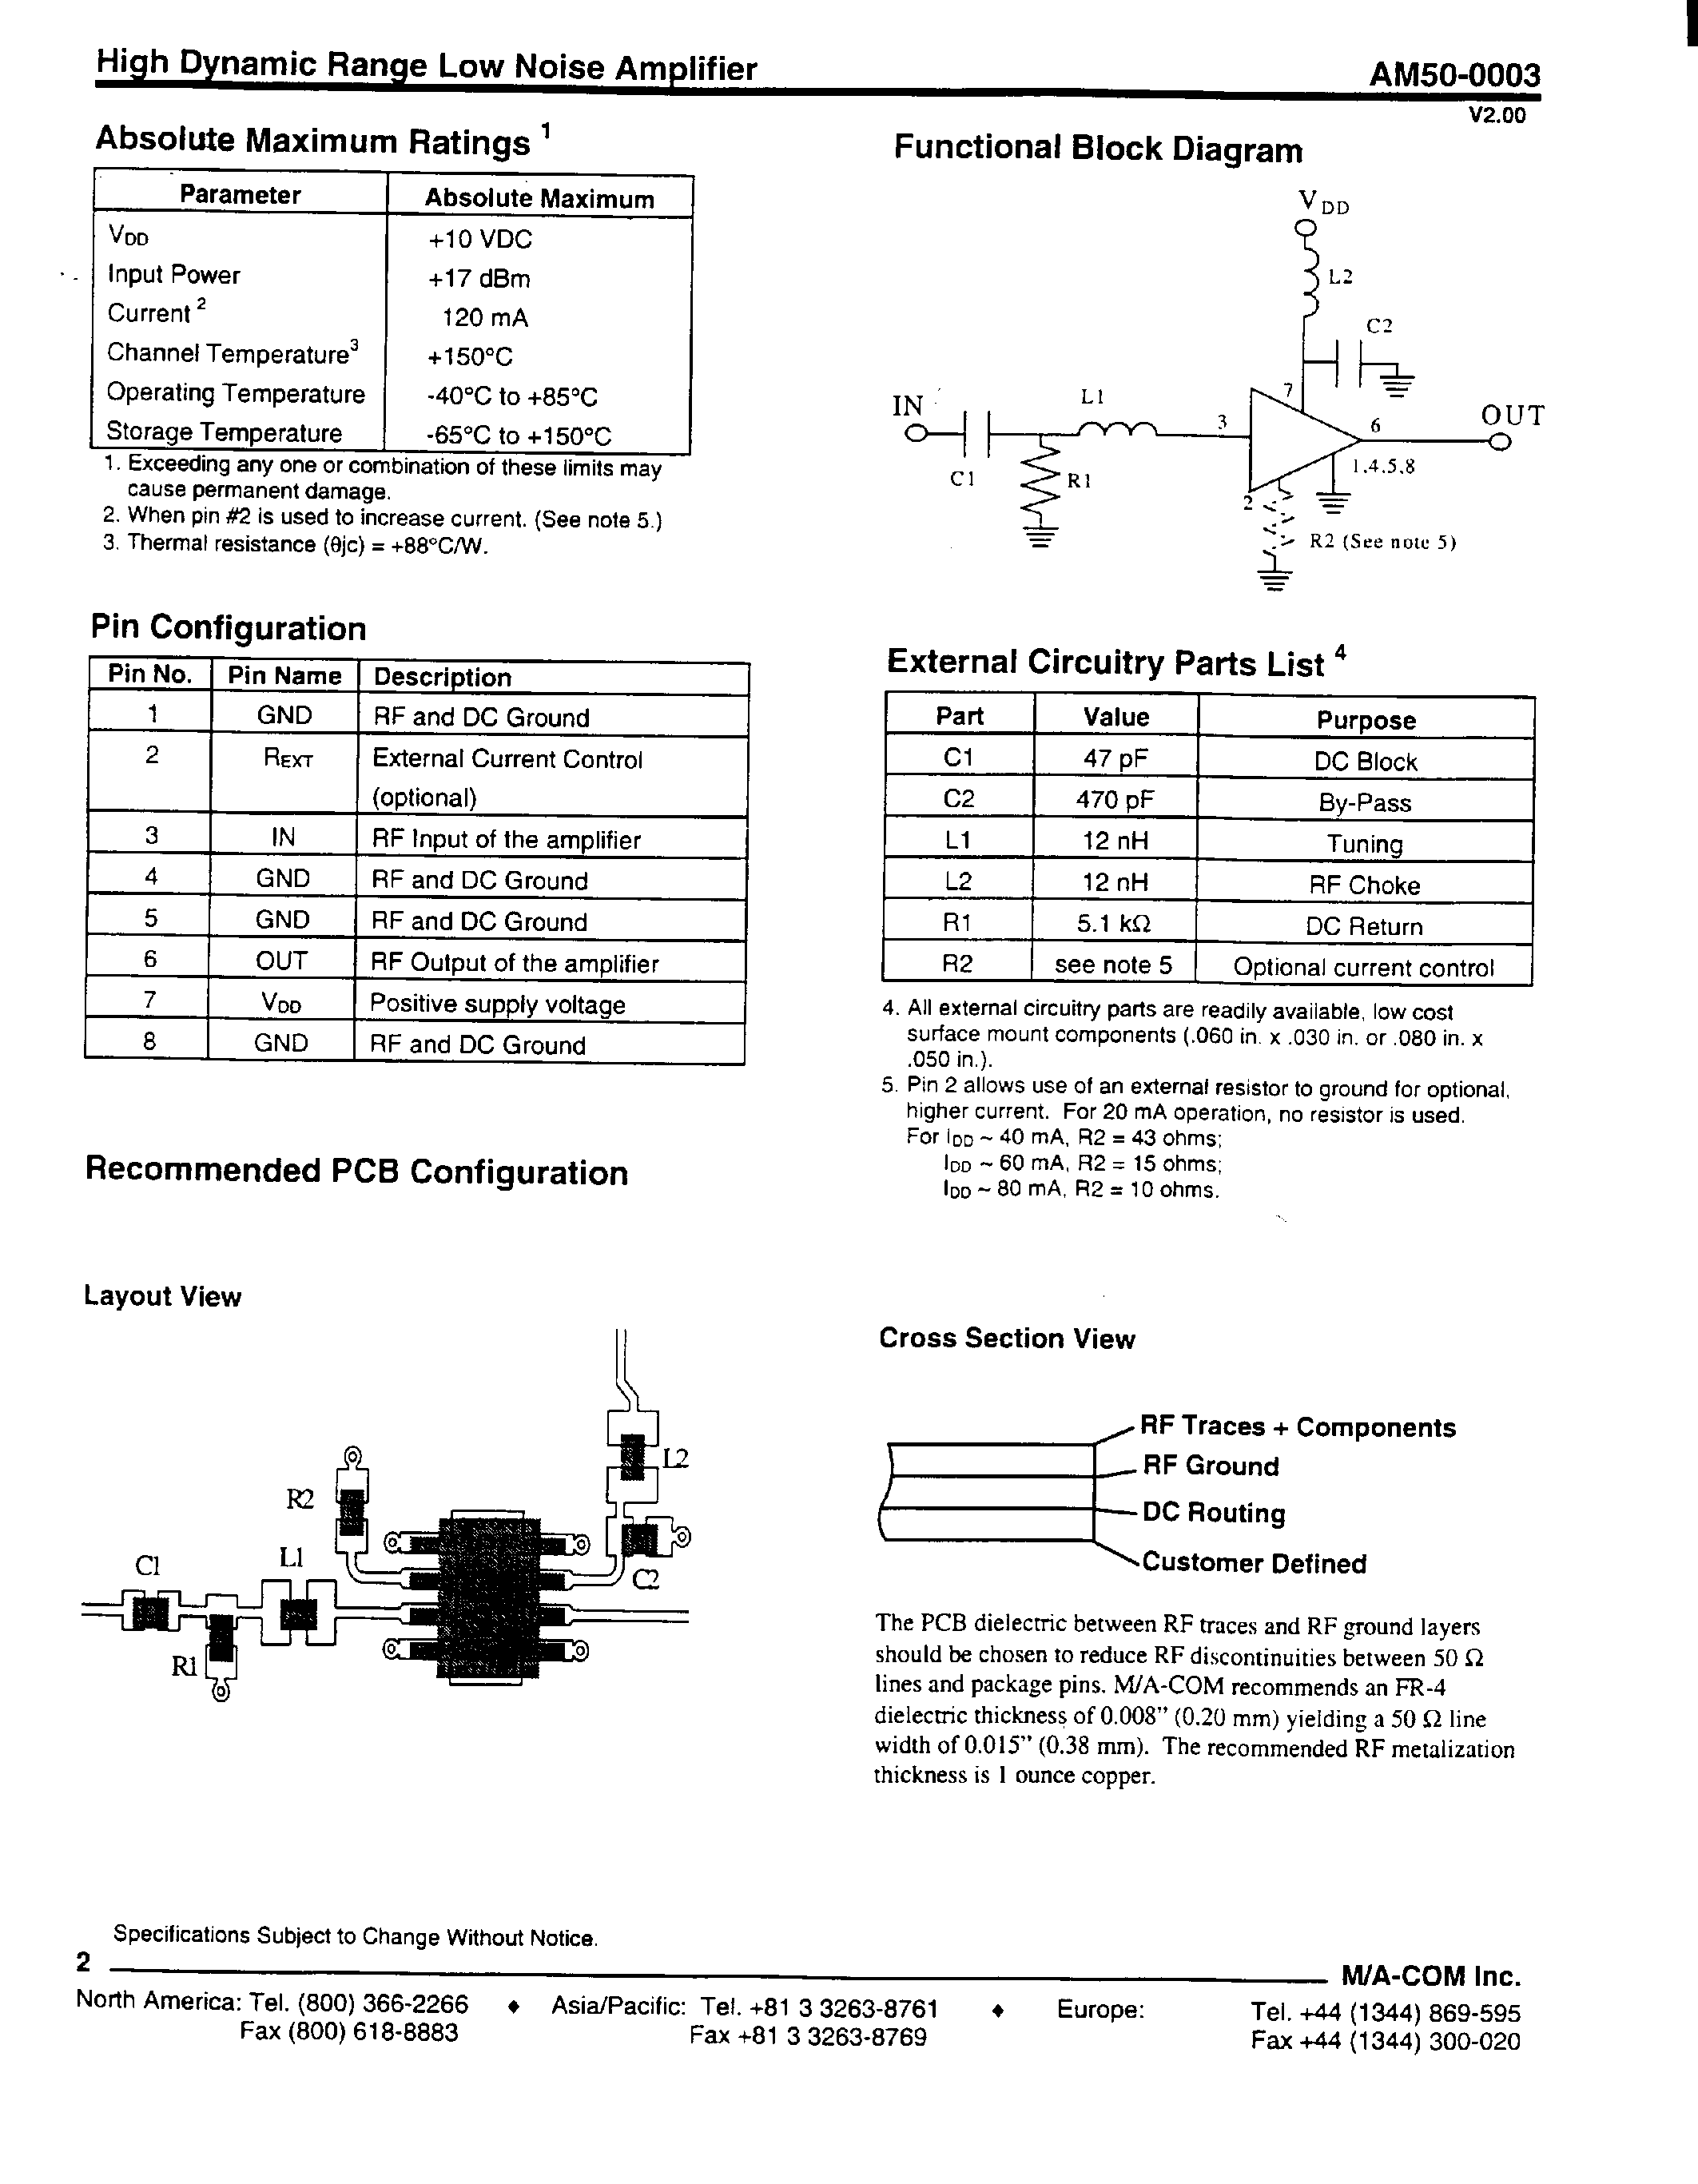 Datasheet AM50-0003RTR - High Dynamic Range Low Noise Amplifier 800-1000 MHz page 2